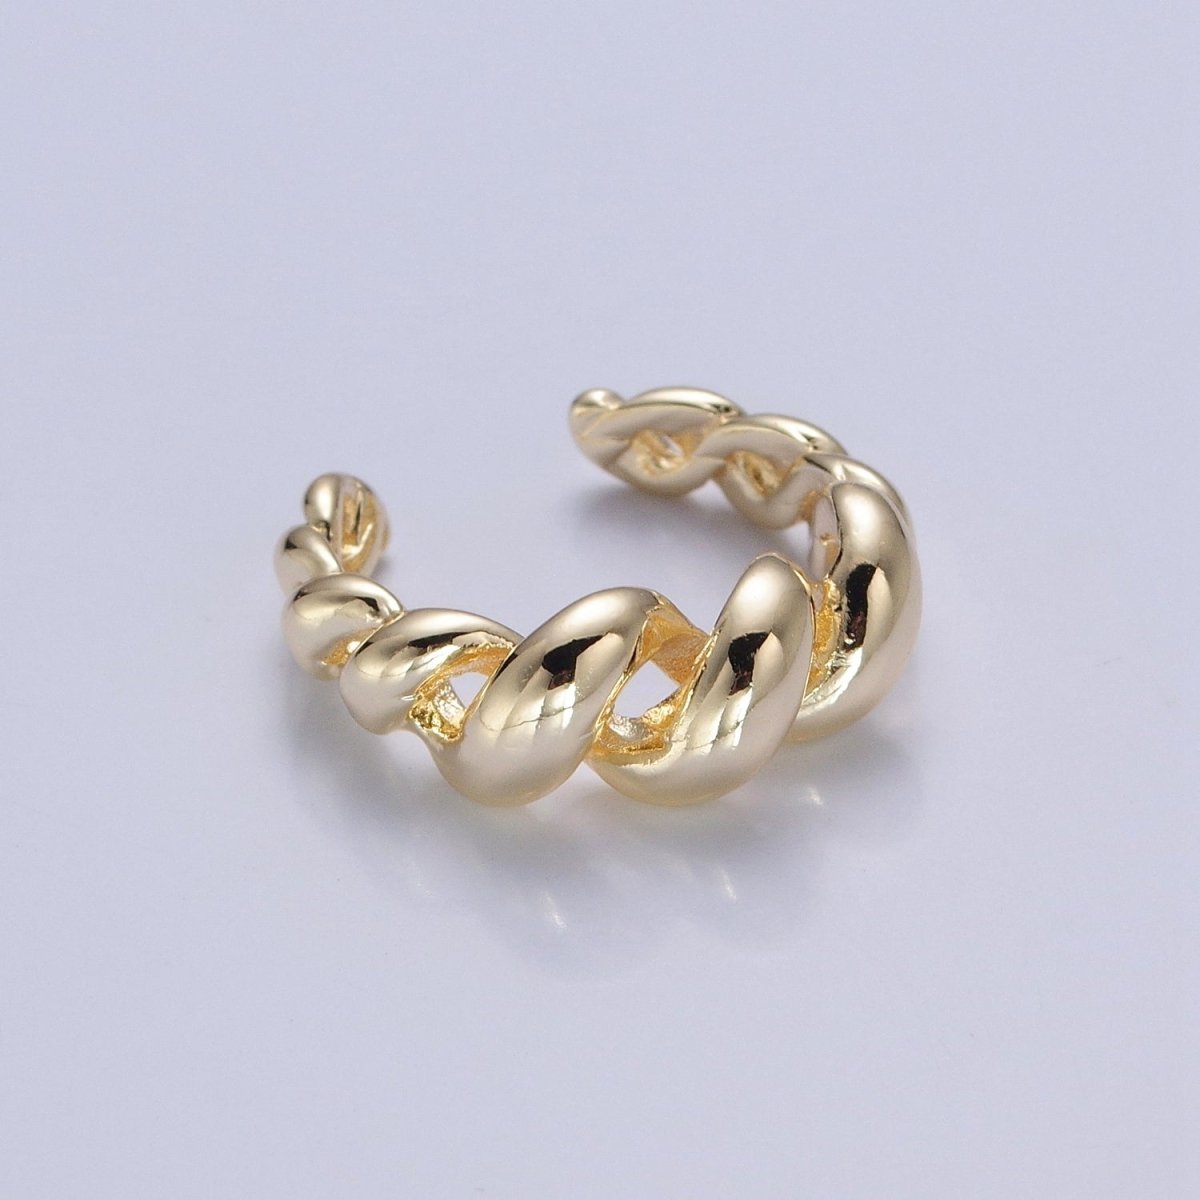 Gold Twisted Ring, Twist Ring, Spiral Gold Ring, Twined Ring Midi Ring Stackable Jewelry O-779 - DLUXCA